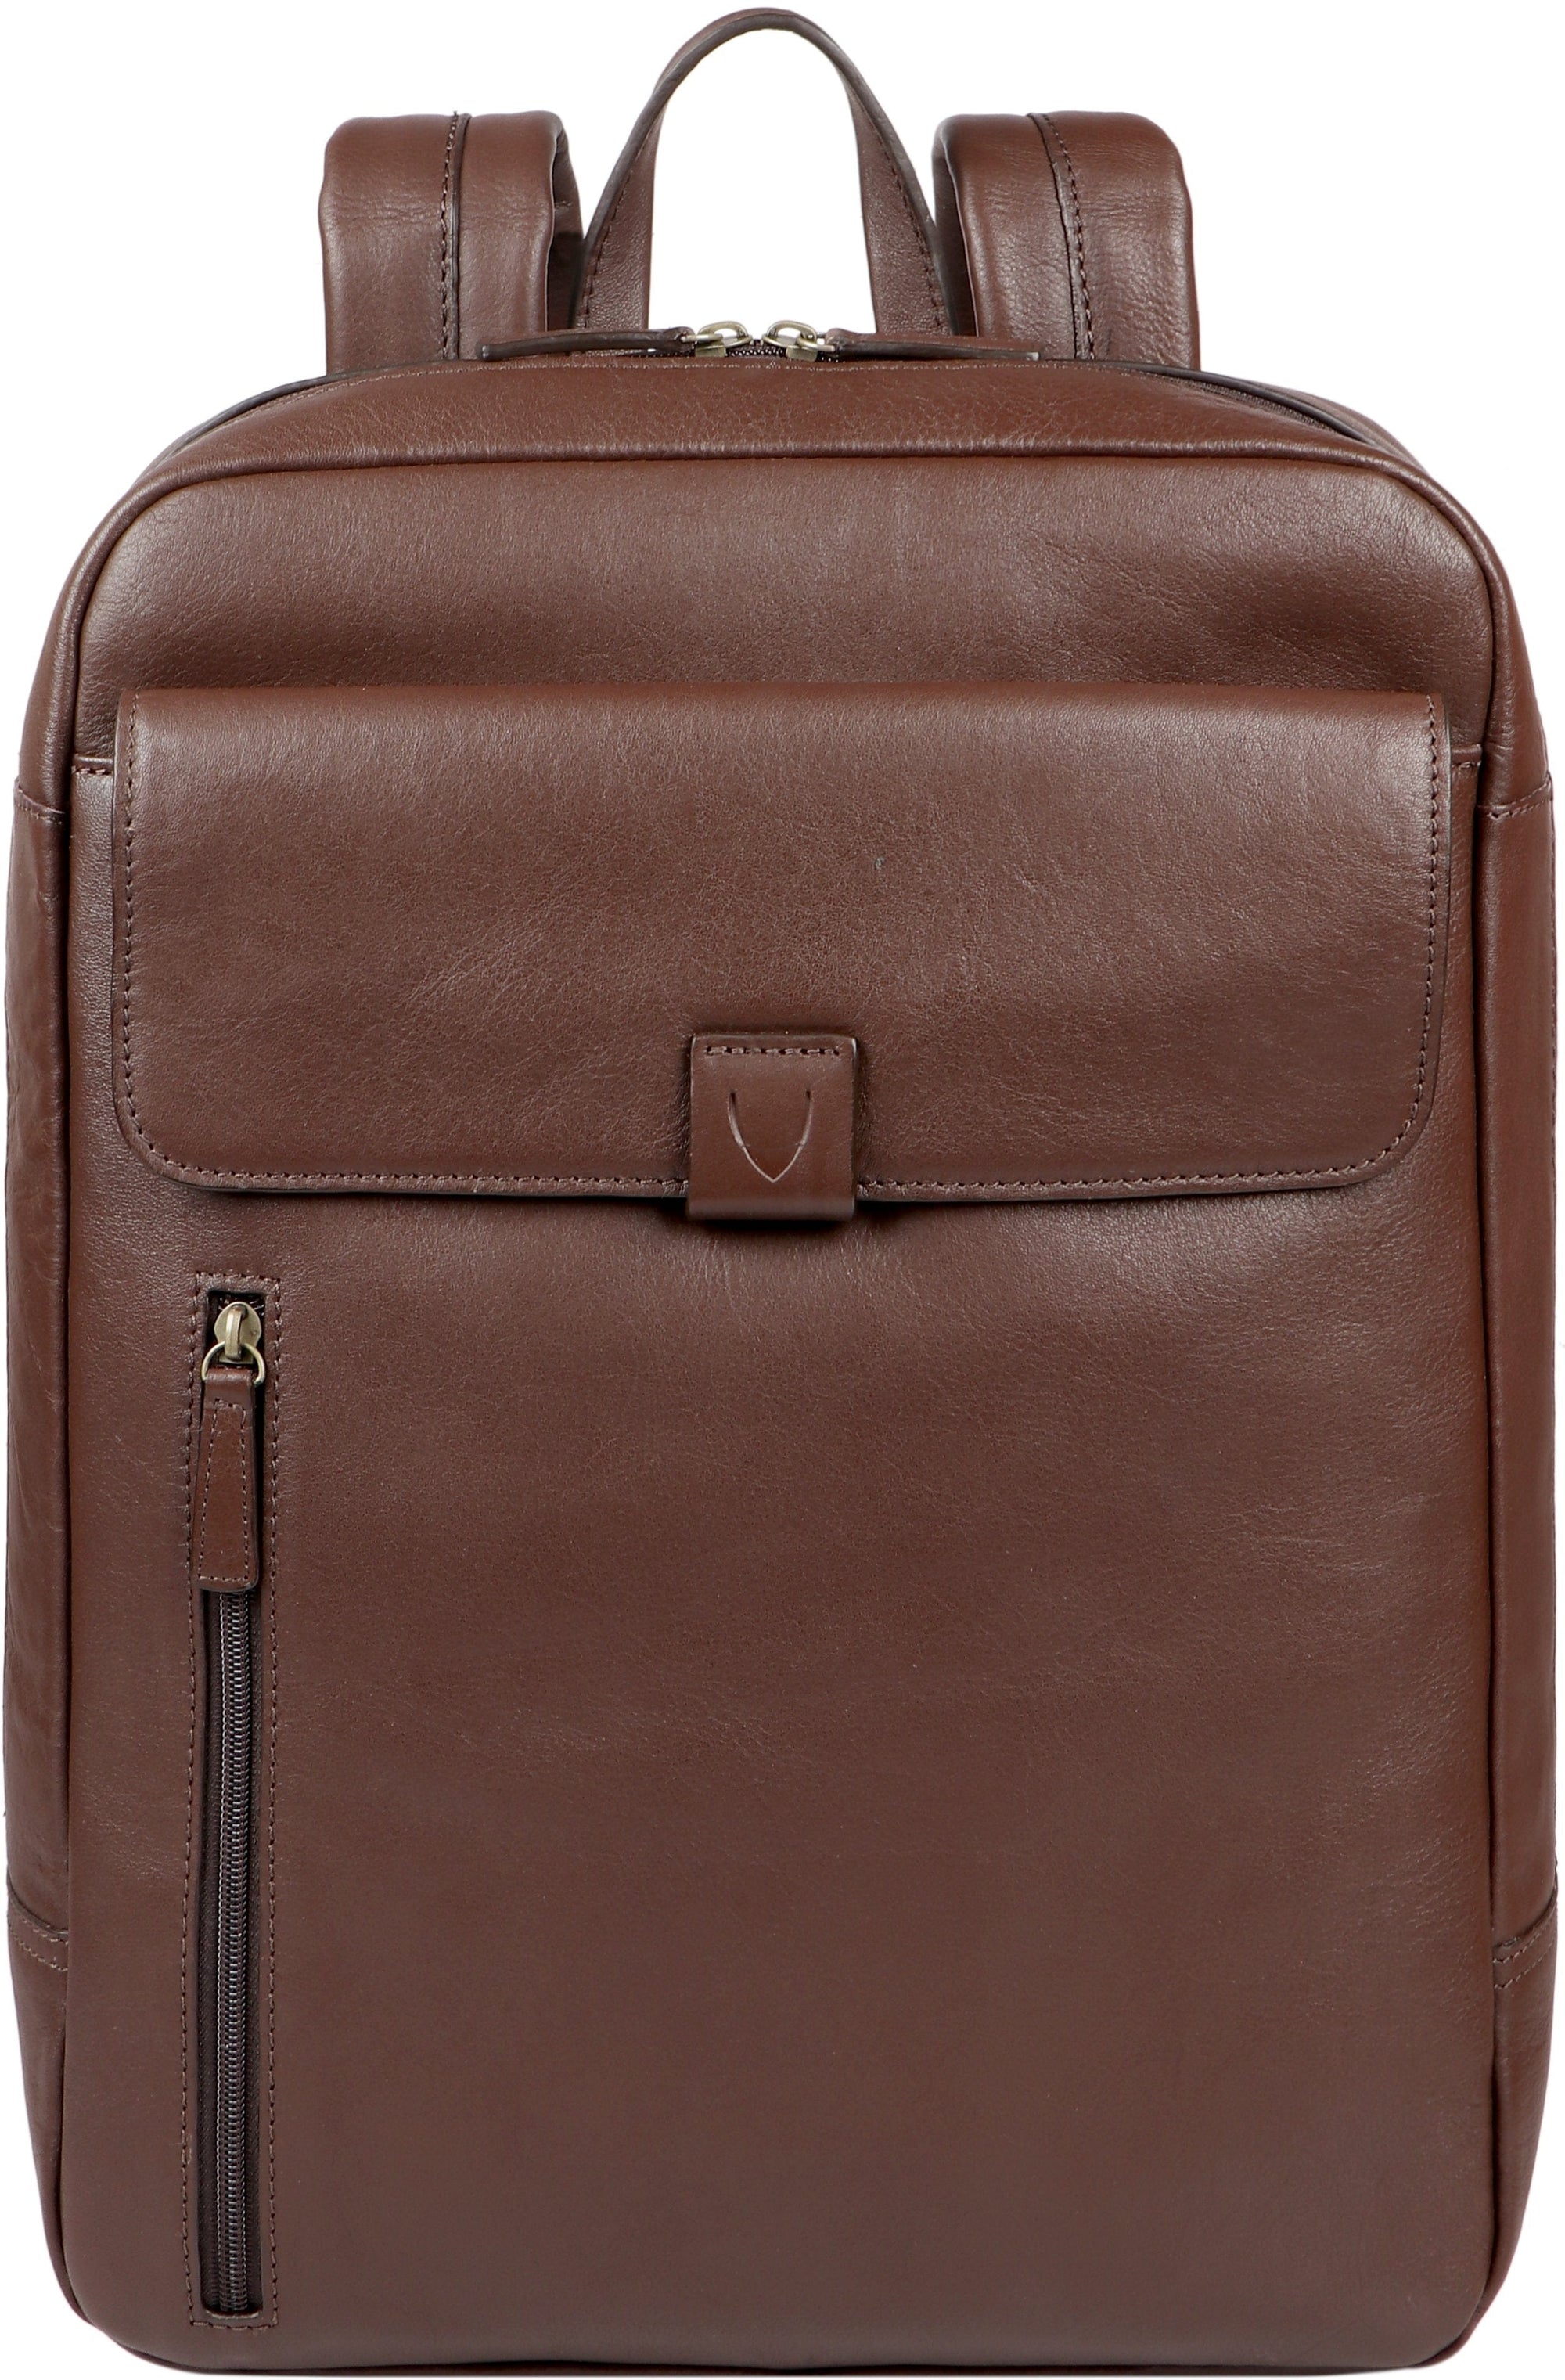 Hidesign Aiden Large Multi-Functional Leather Backpack